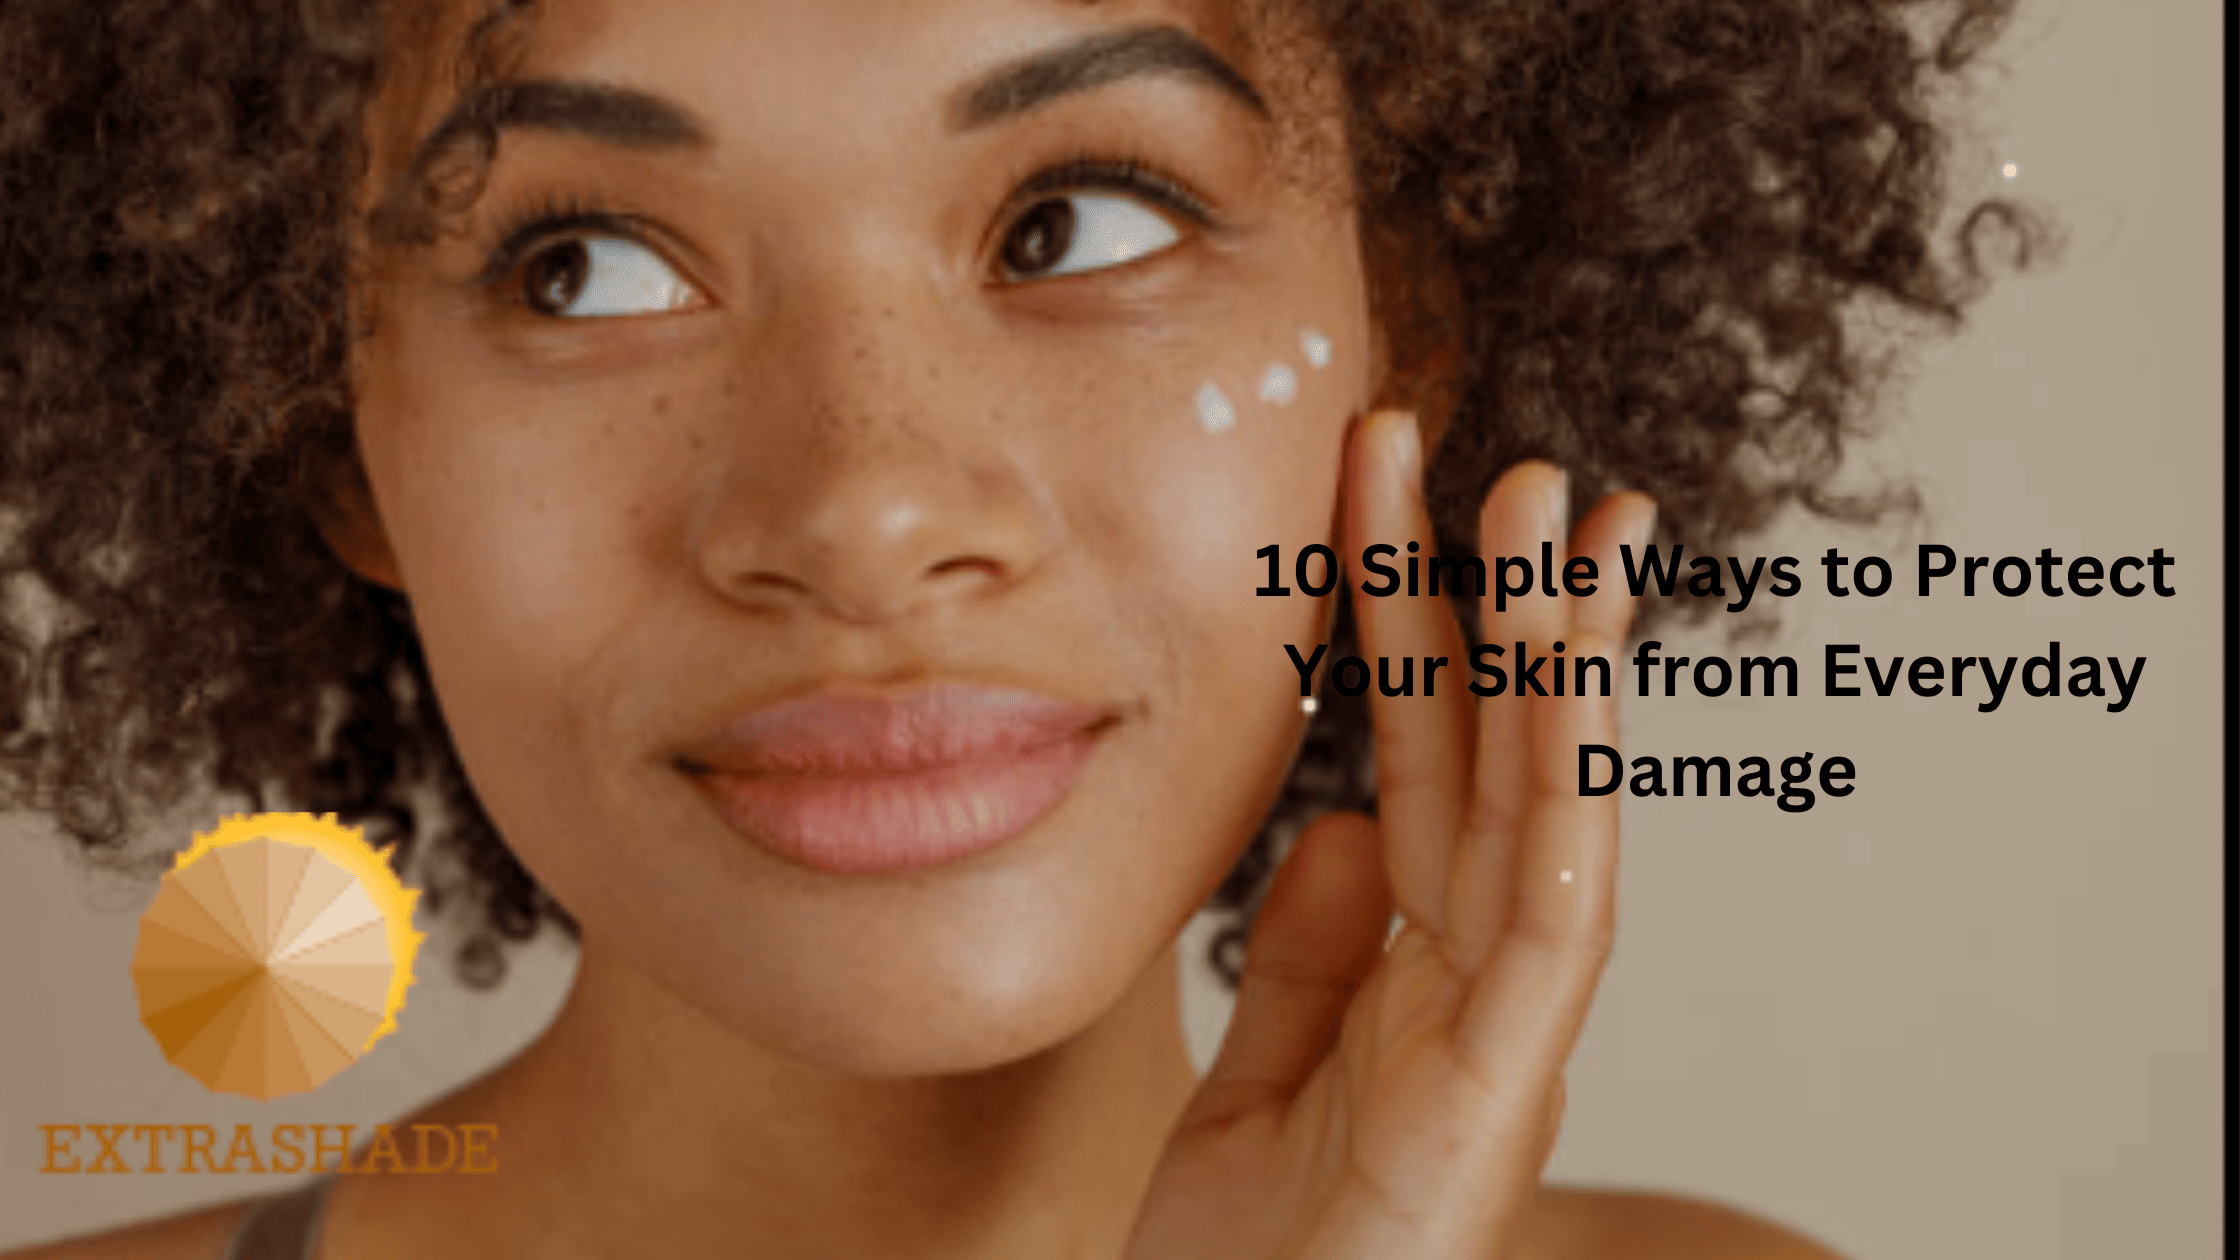 10 Simple Ways to Protect Your Skin from Everyday Damage